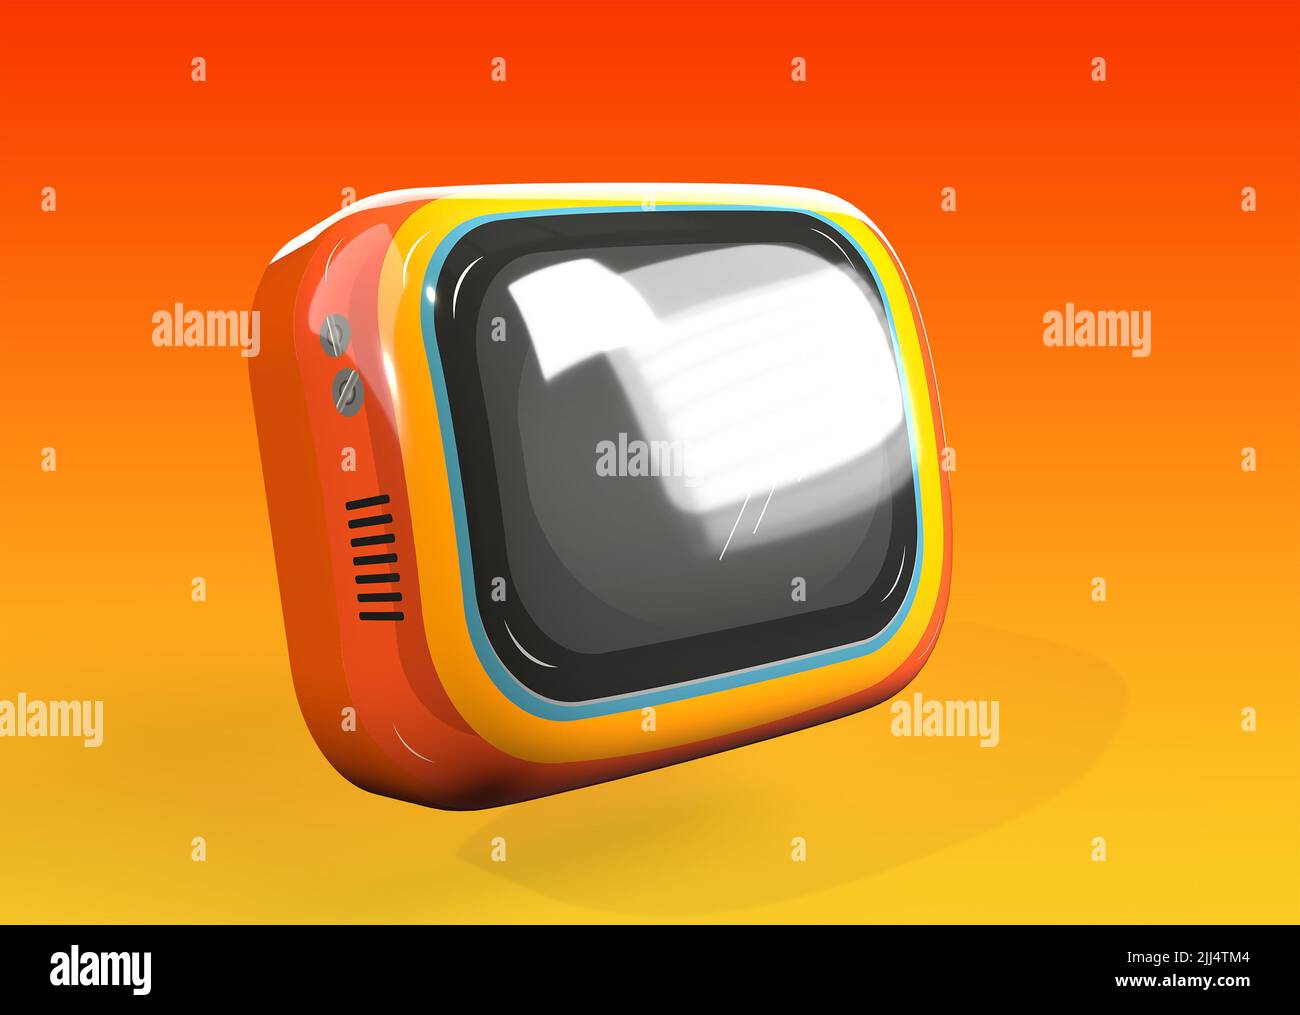 Retro TV 3D Render on a Colourful orange and yellow background Stock Photo